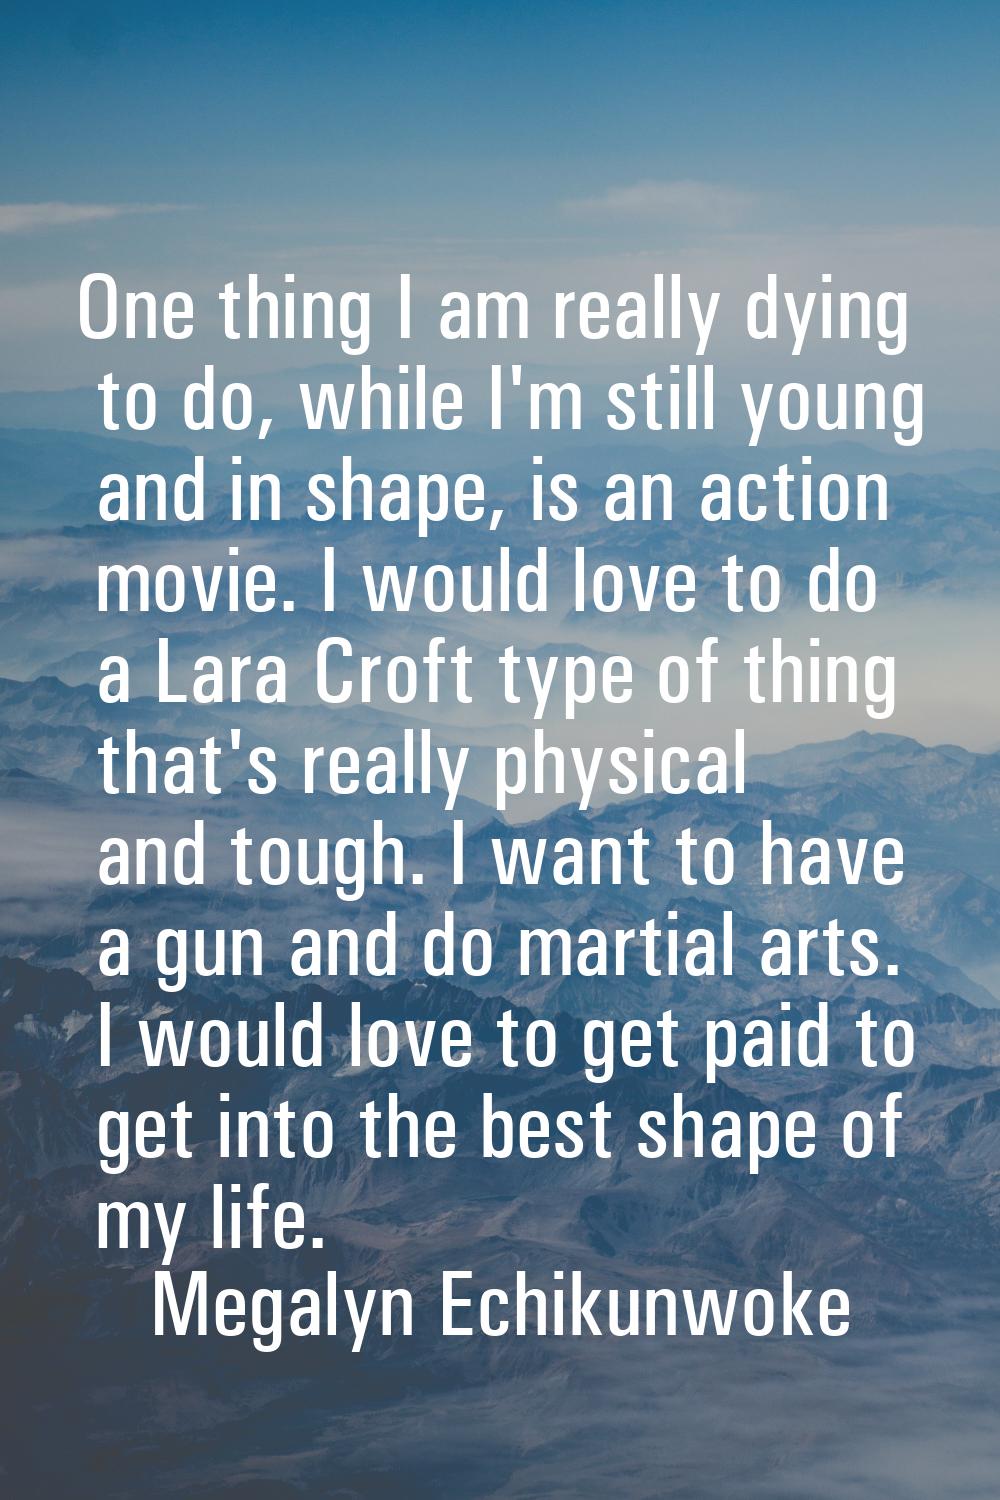 One thing I am really dying to do, while I'm still young and in shape, is an action movie. I would 